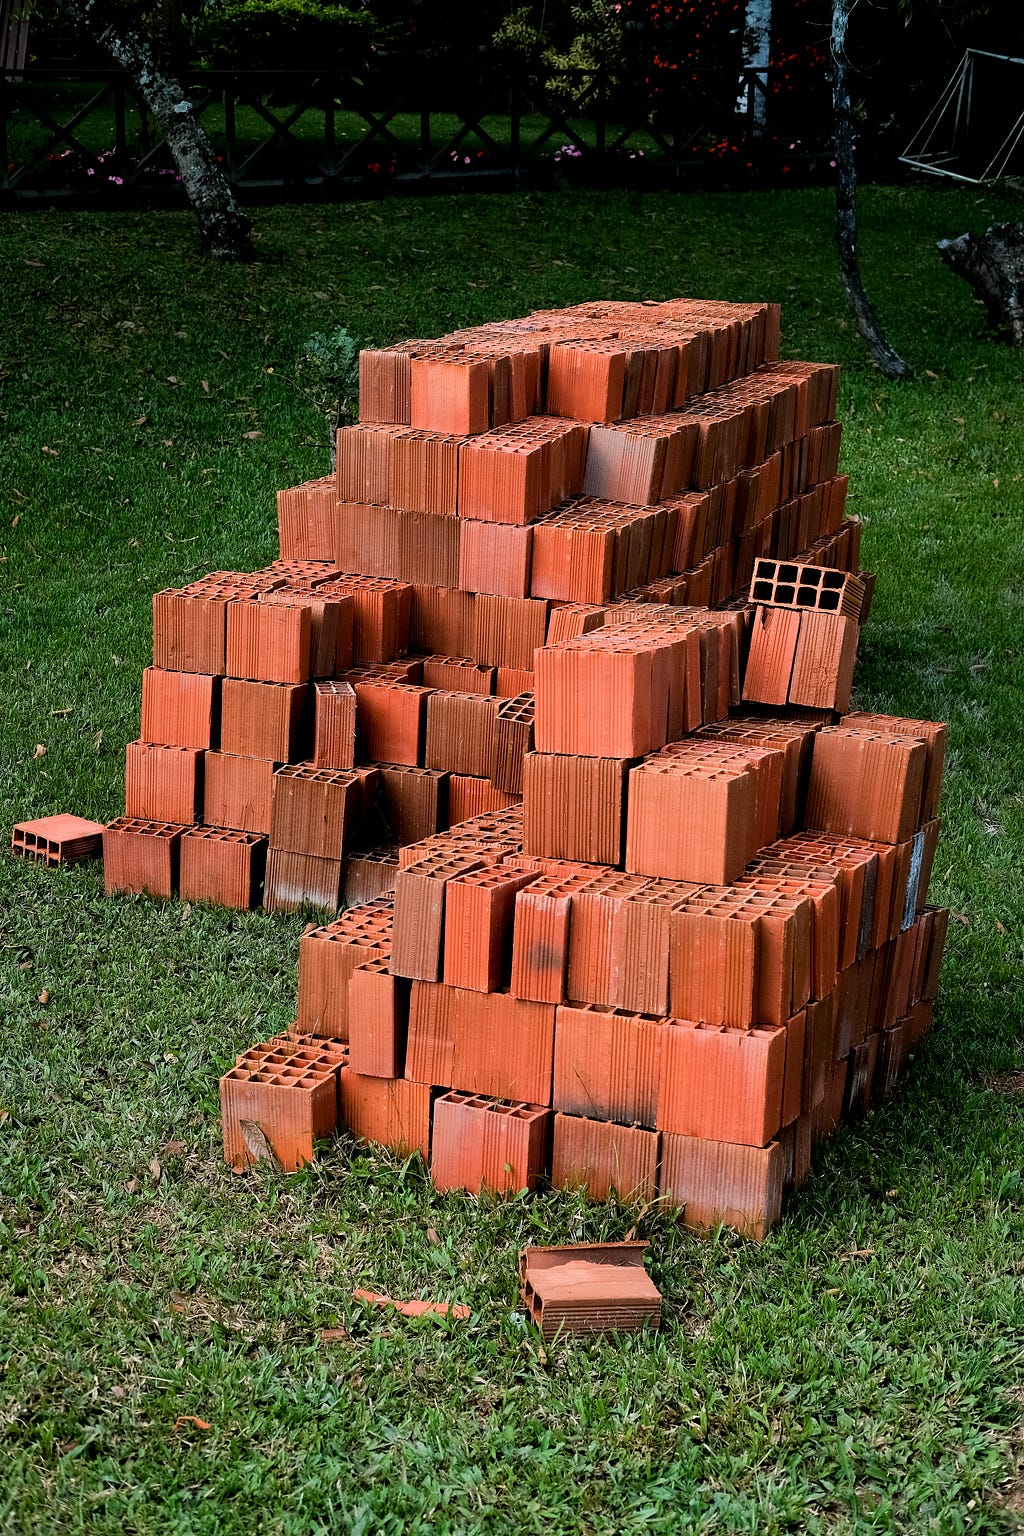 A photograph of a pile of bricks stacked on a lawn. Photo by Matt W Newman on Unsplash.